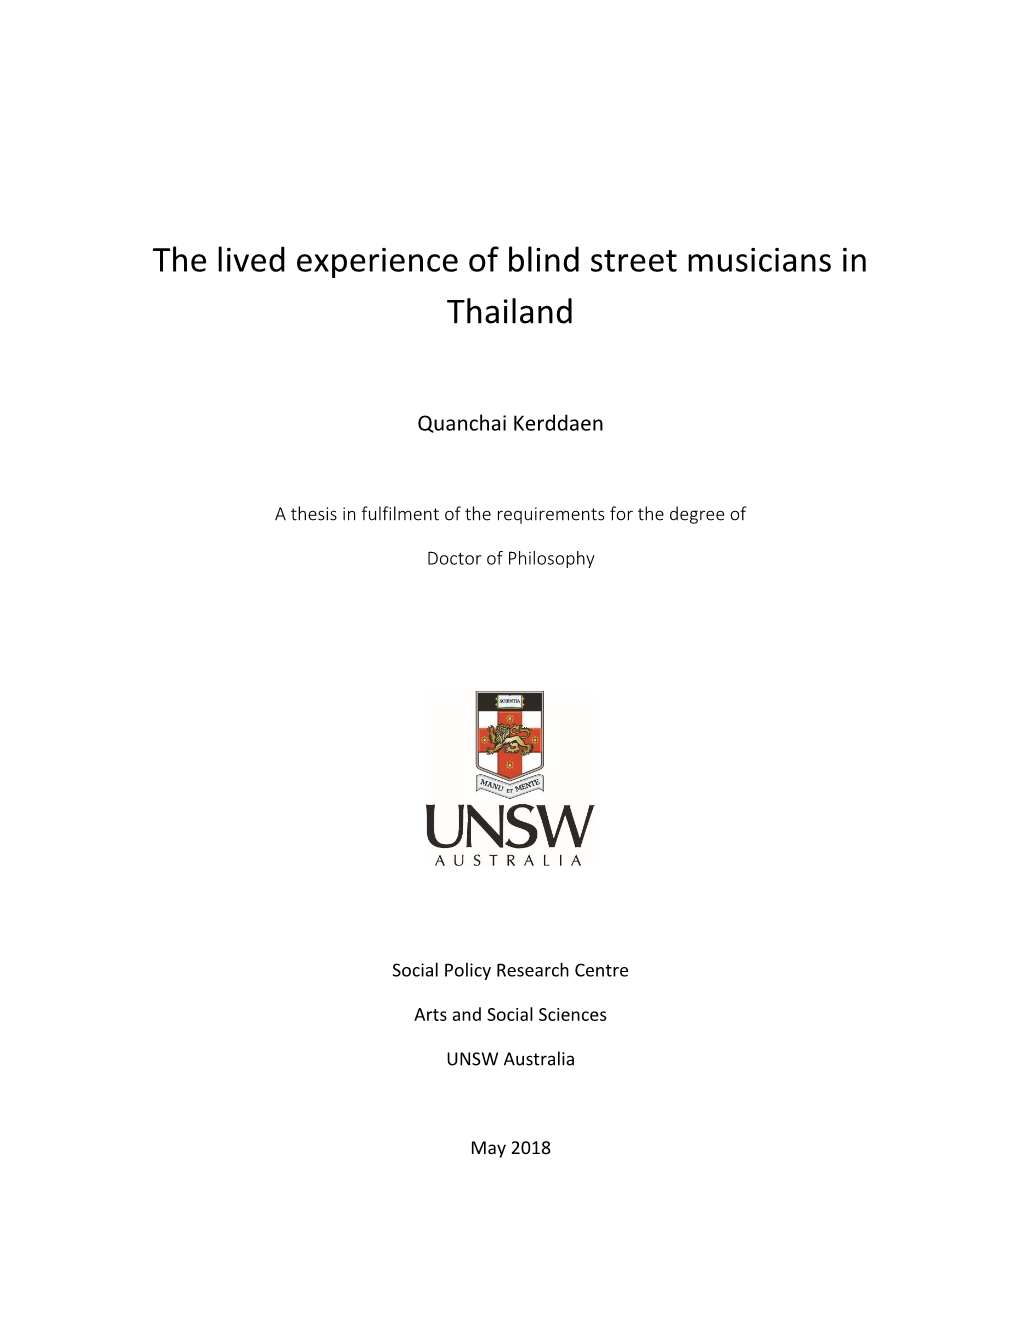 The Lived Experience of Blind Street Musicians in Thailand